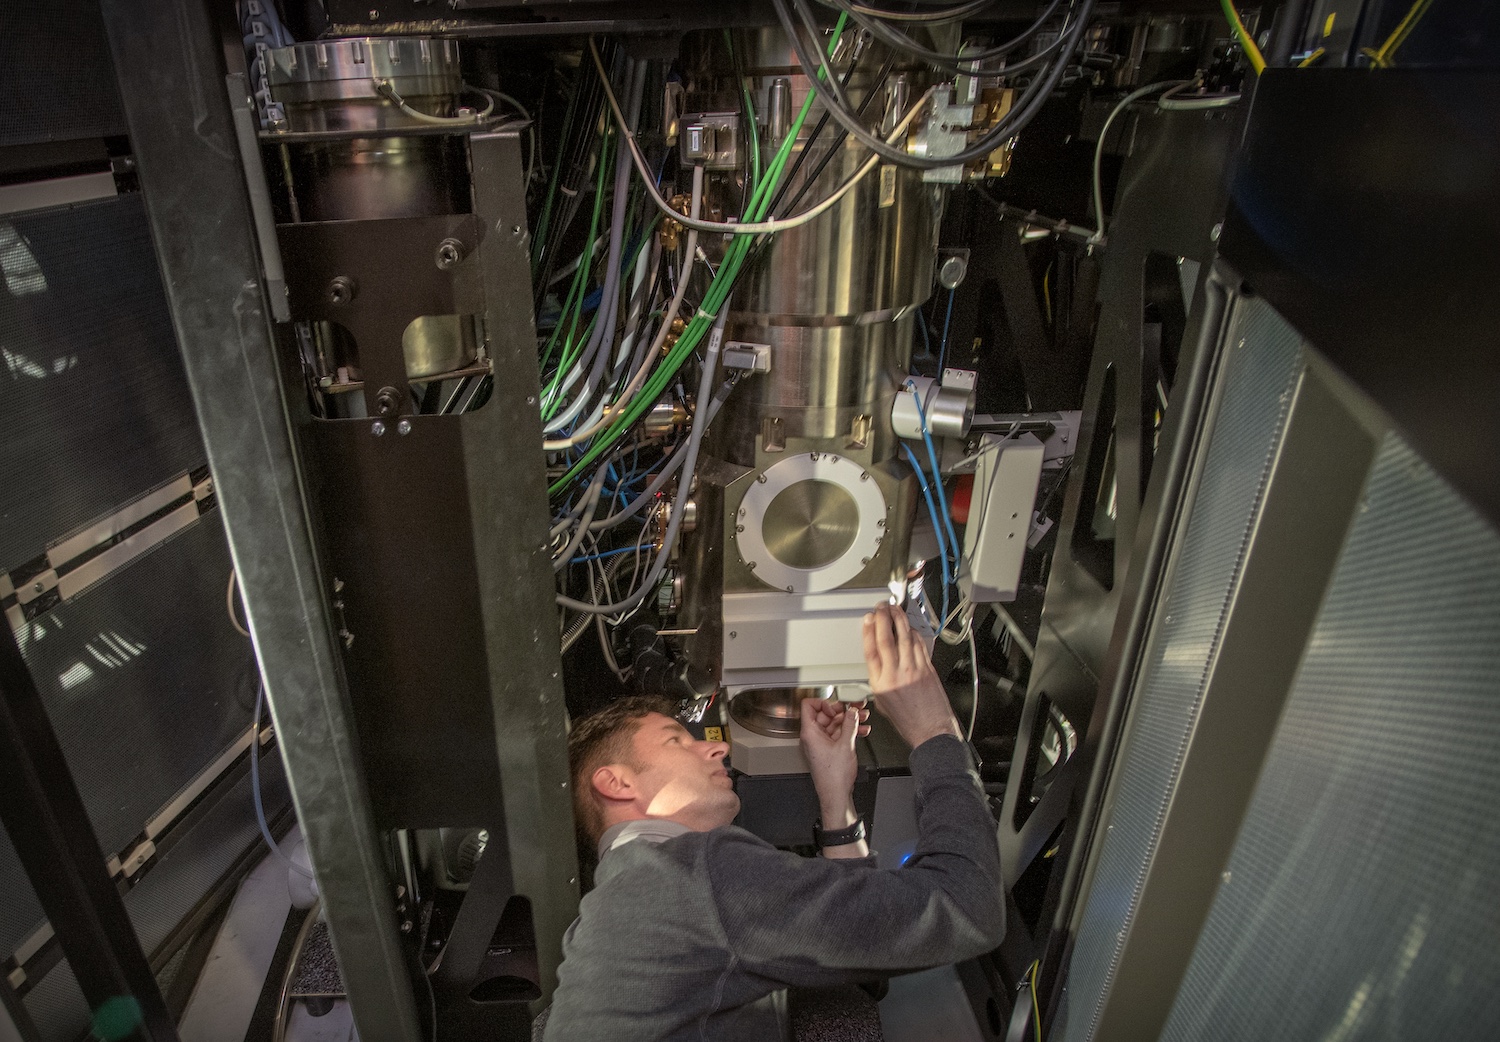 Photo - A technician works on the TEAM 0.5 microscope. The microscope has been upgraded with a superfast detector called the 4D Camera that can capture atomic-scale images in millionths-of-a-second increments. (Credit: Thor Swift/Berkeley Lab)